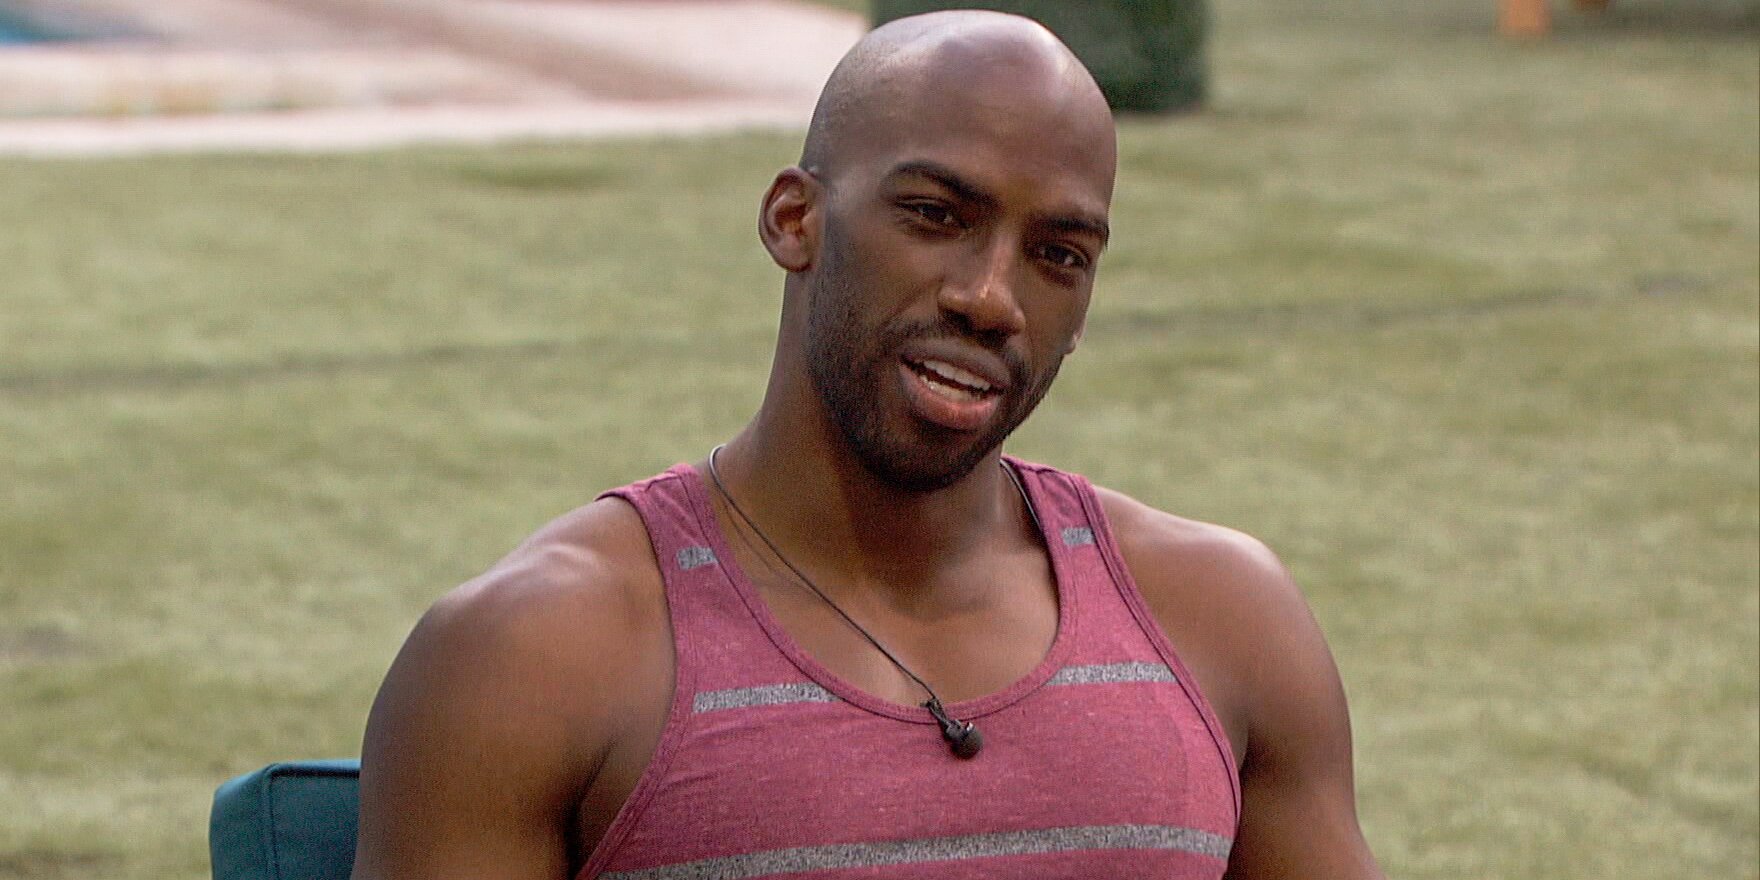 Big Brother recap: Christian is conflicted about who to put up during his HOH week